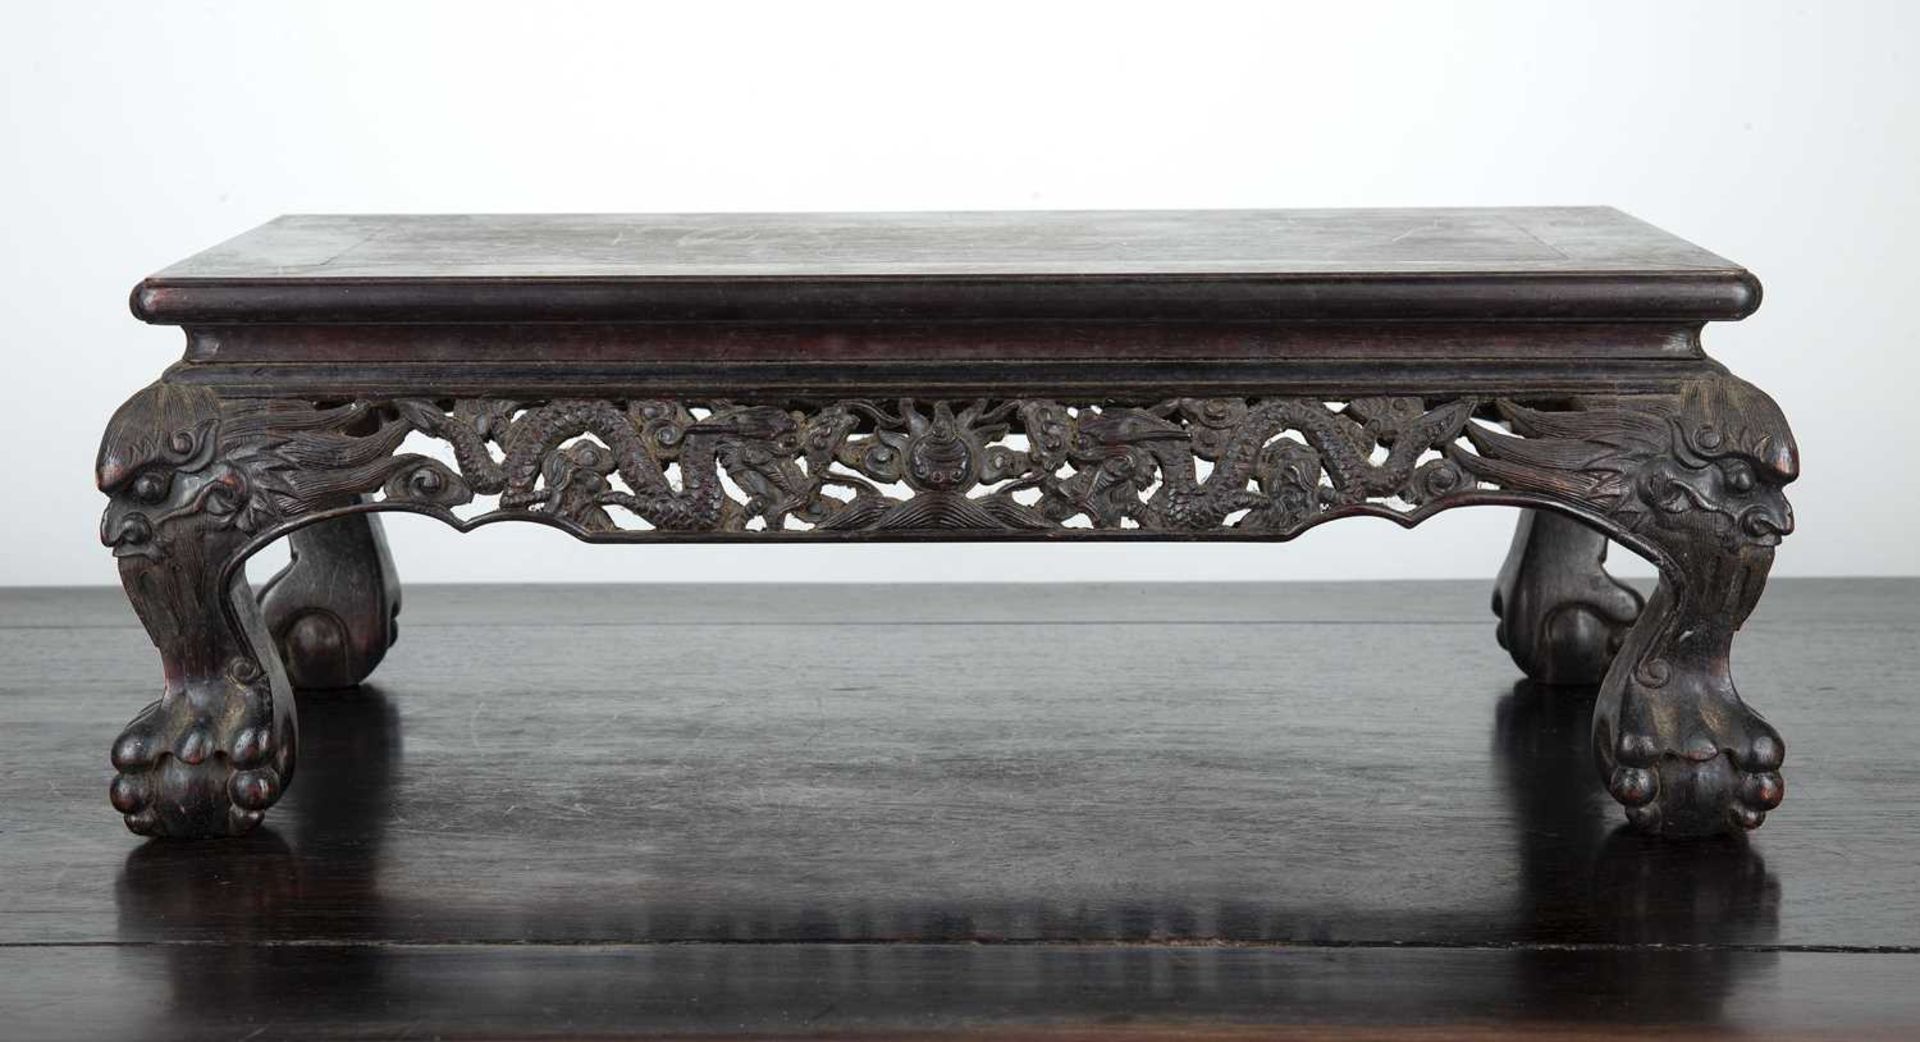 Hardwood rectangular table top stand Chinese, late 19th/ early 20th Century with carved dragon